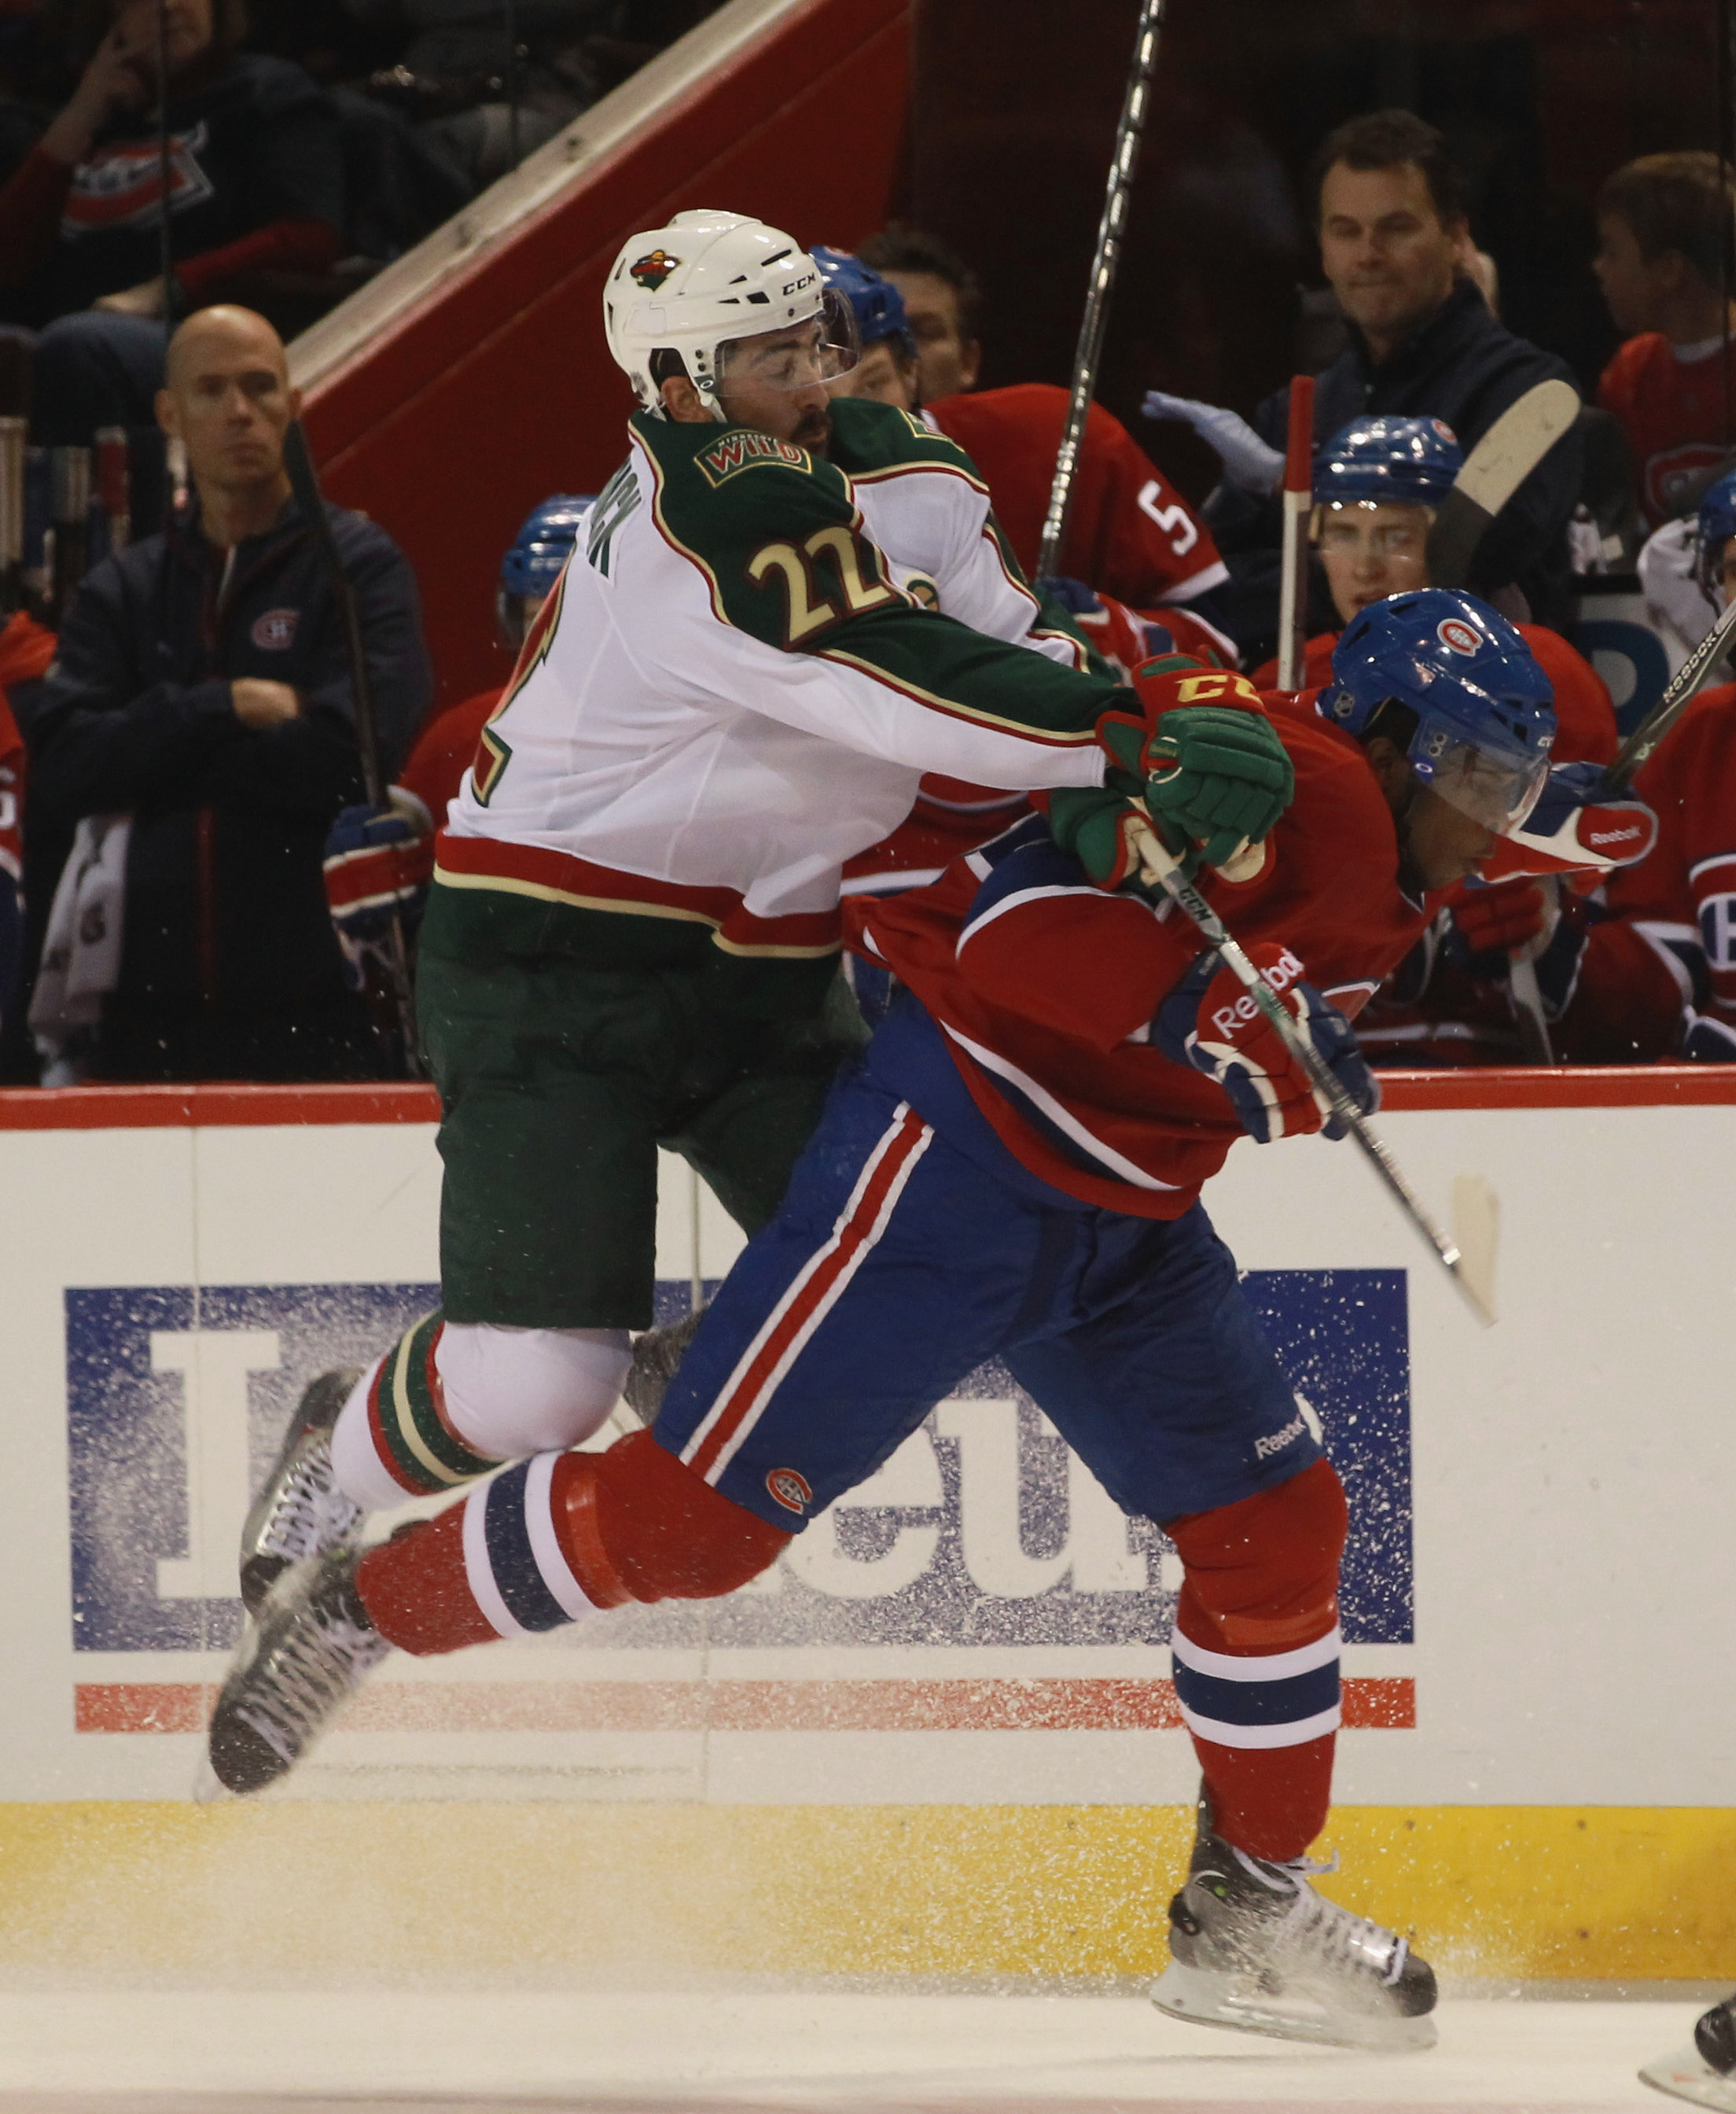 Cal Clutterbuck - NHL Right wing - News, Stats, Bio and more - The